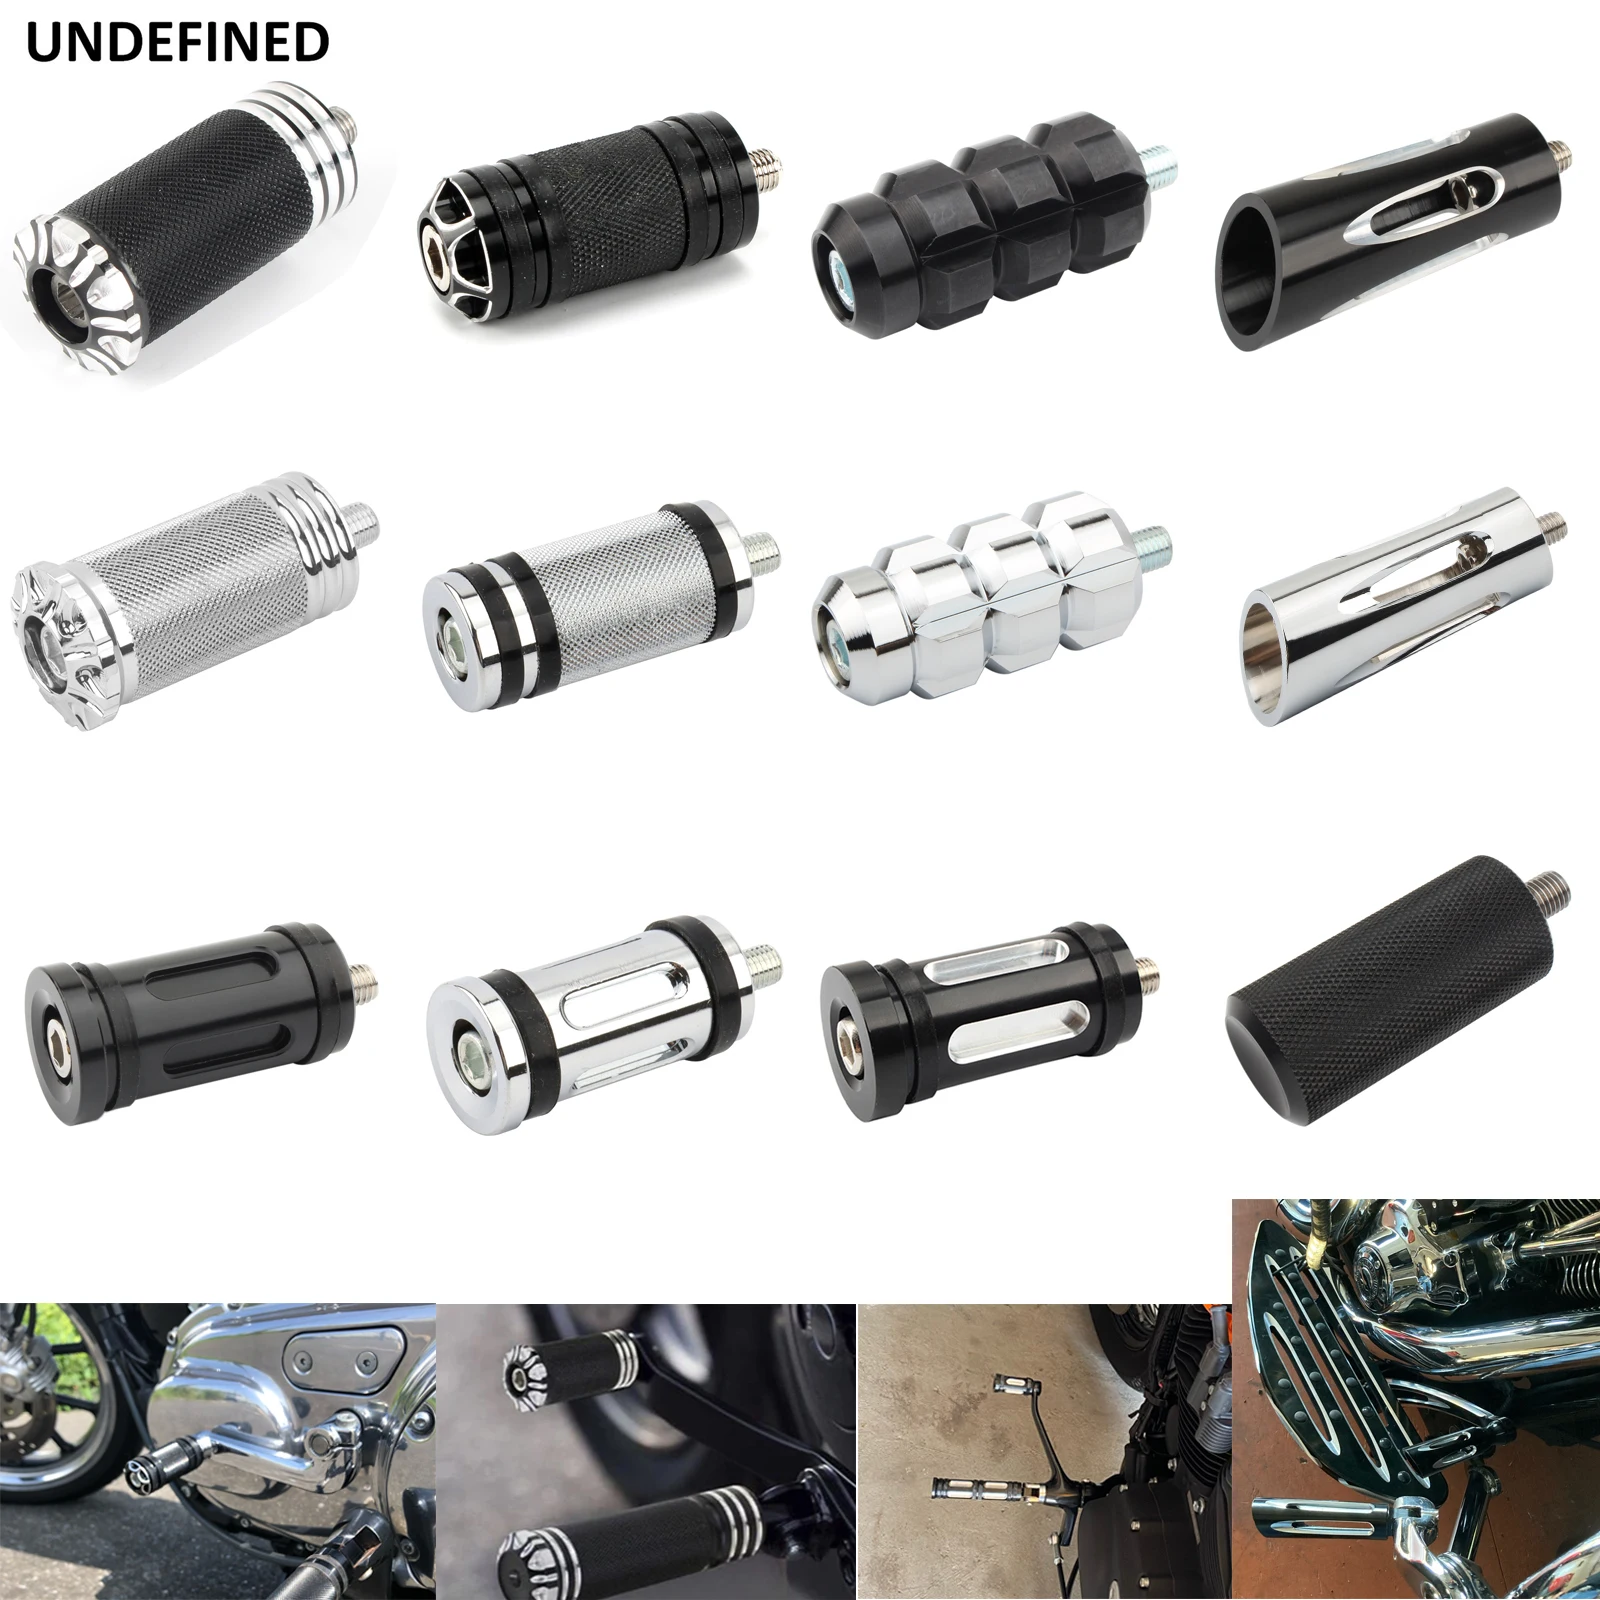 Shift lever shifter pegs nail for harley sportster 883 1200 xl softail breakout touring thumb200